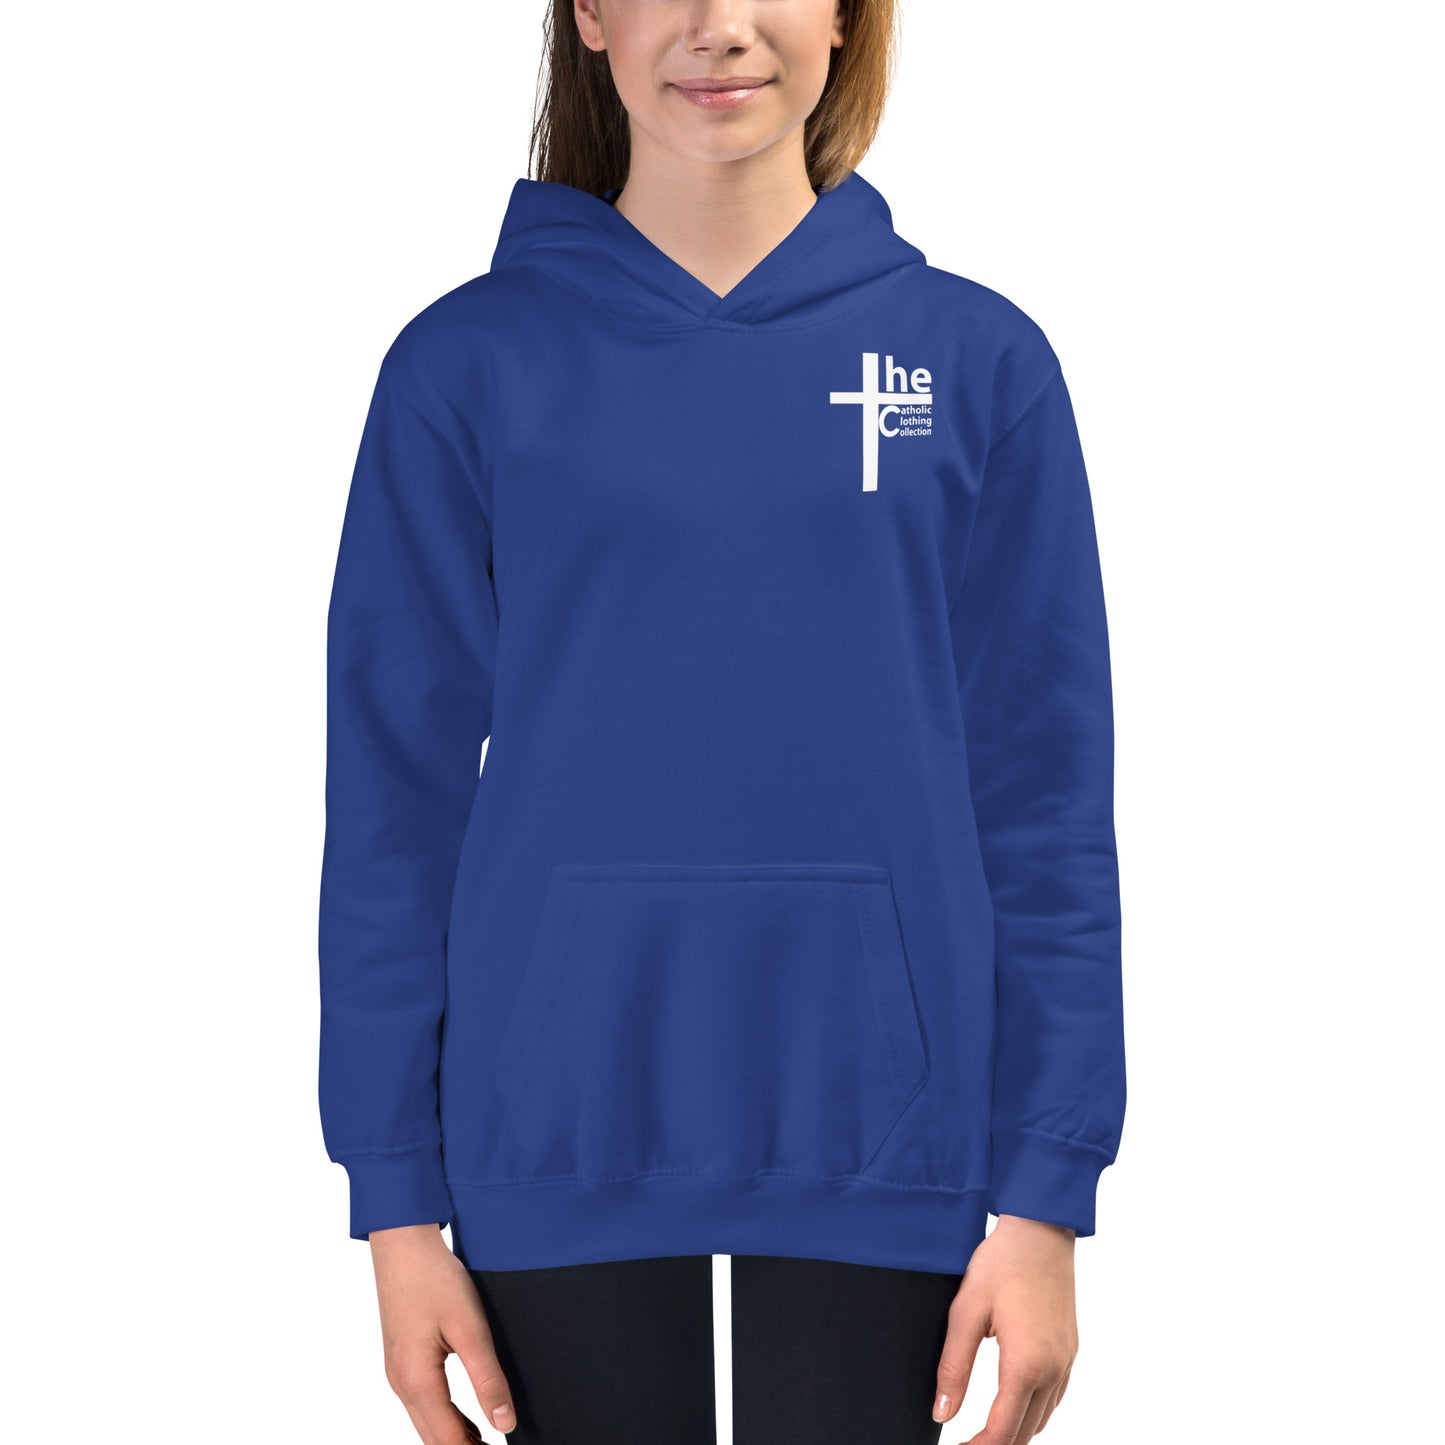 Christian is my Name, Catholic my Surname  Children's Hoodie